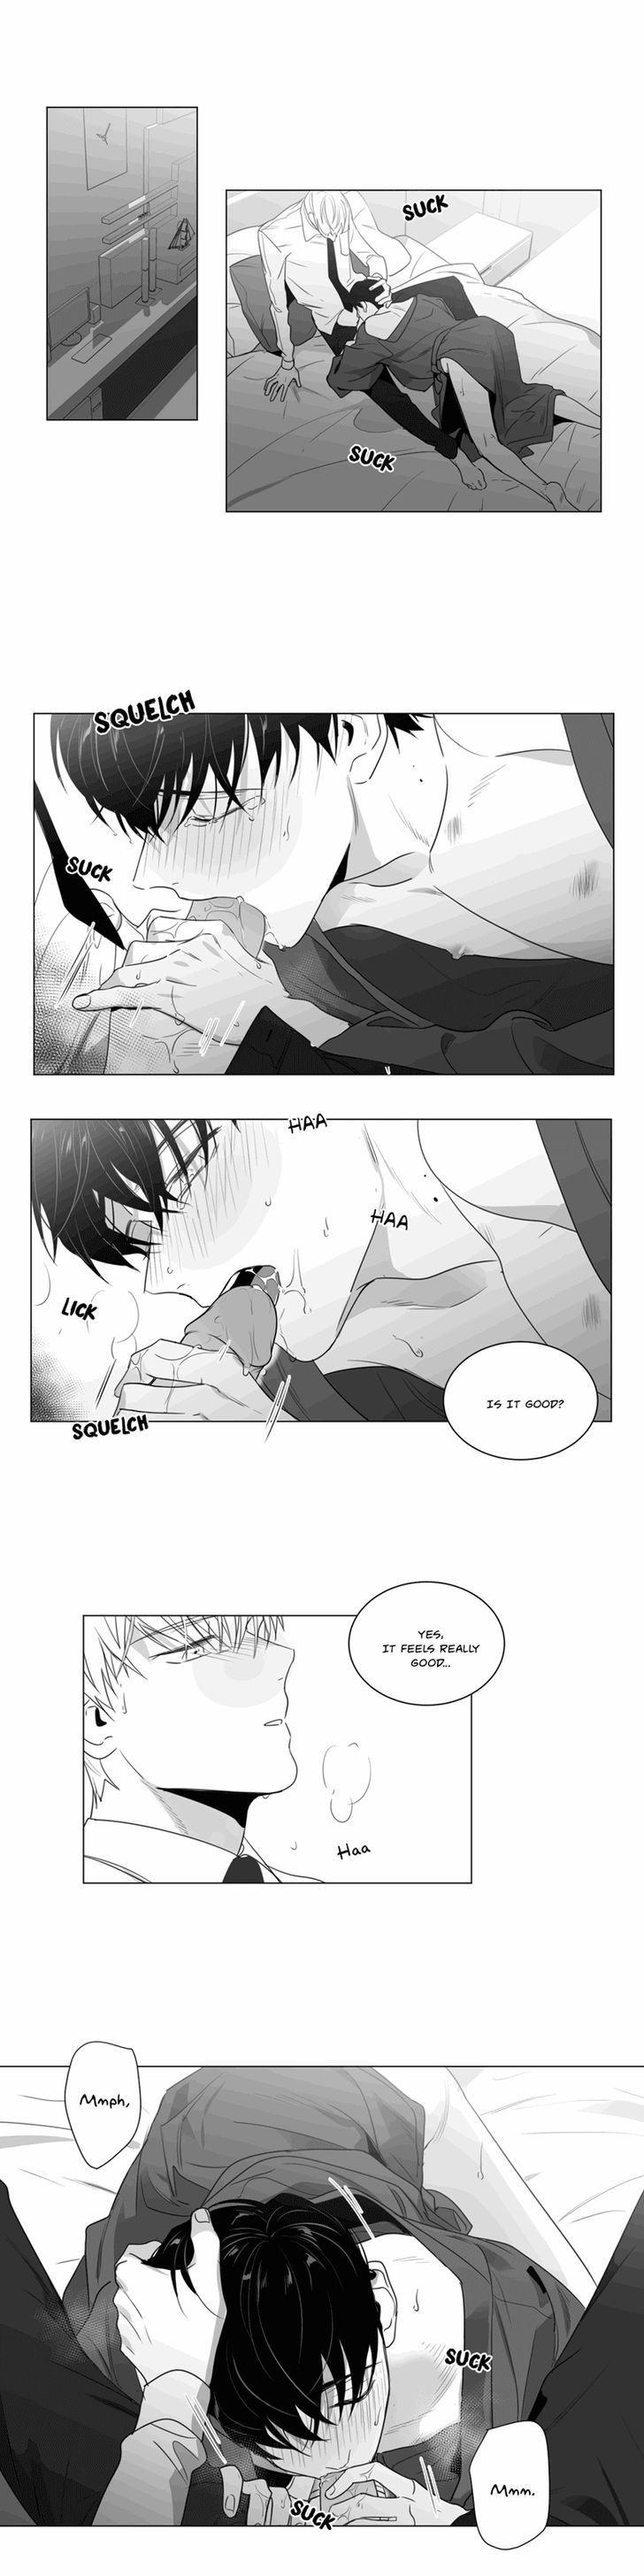 Lover Boy (Lezhin) Chapter 034 page 6